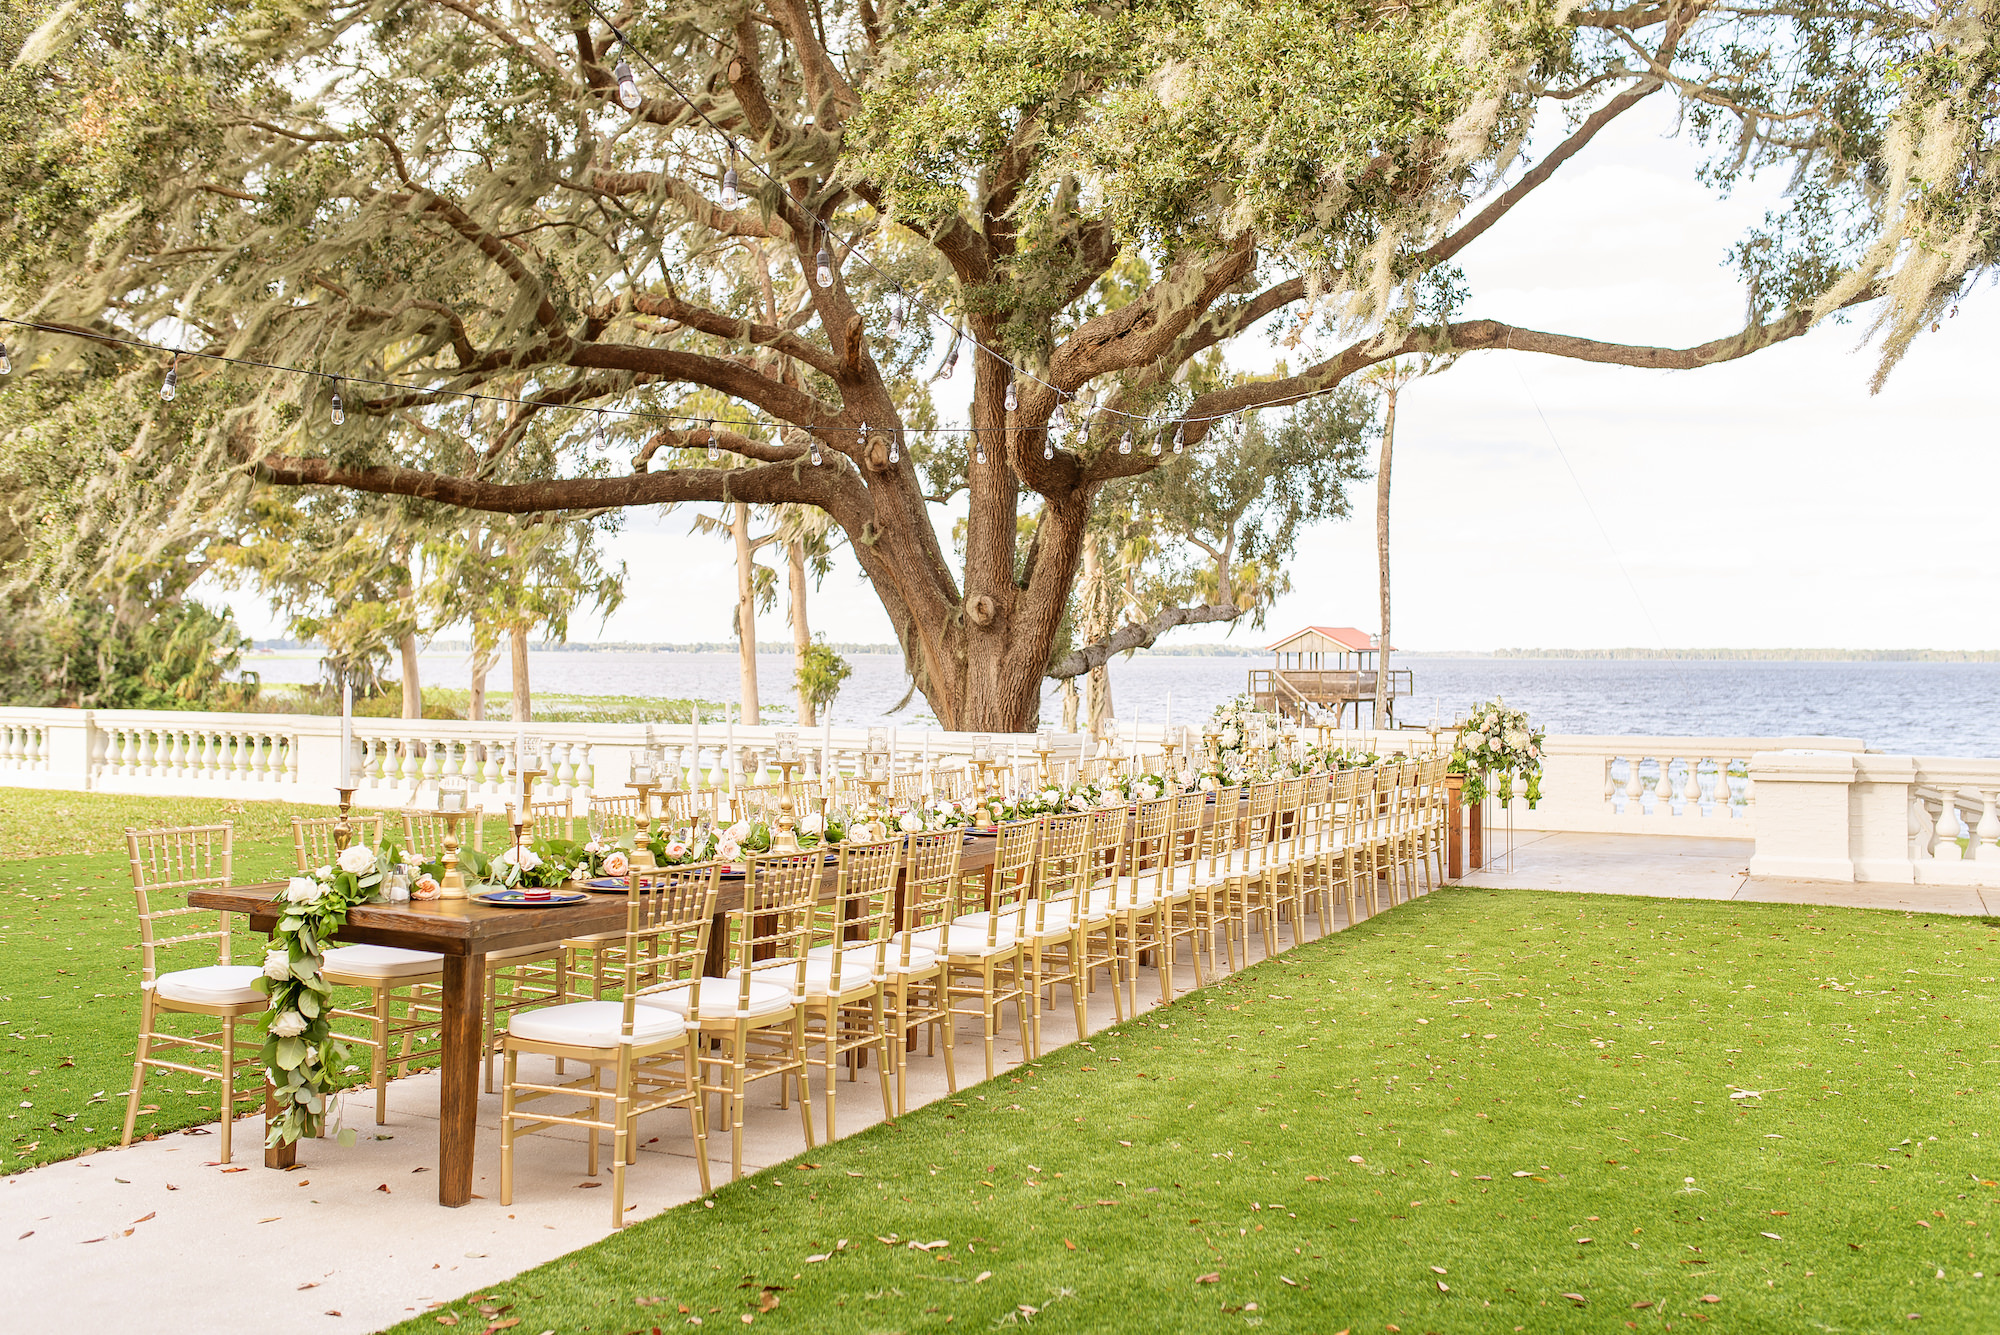 Garden-Inspired Wedding Decor Inspiration | Long Feasting Table for Intimate Wedding Reception | Gold Chiavari Chairs with Cushion | Cascading Rose and Eucalyptus Greenery Centerpiece Ideas | Tampa Bay Wedding Photographer Kristen Marie Photography | Central Florida Venue Bella Cosa